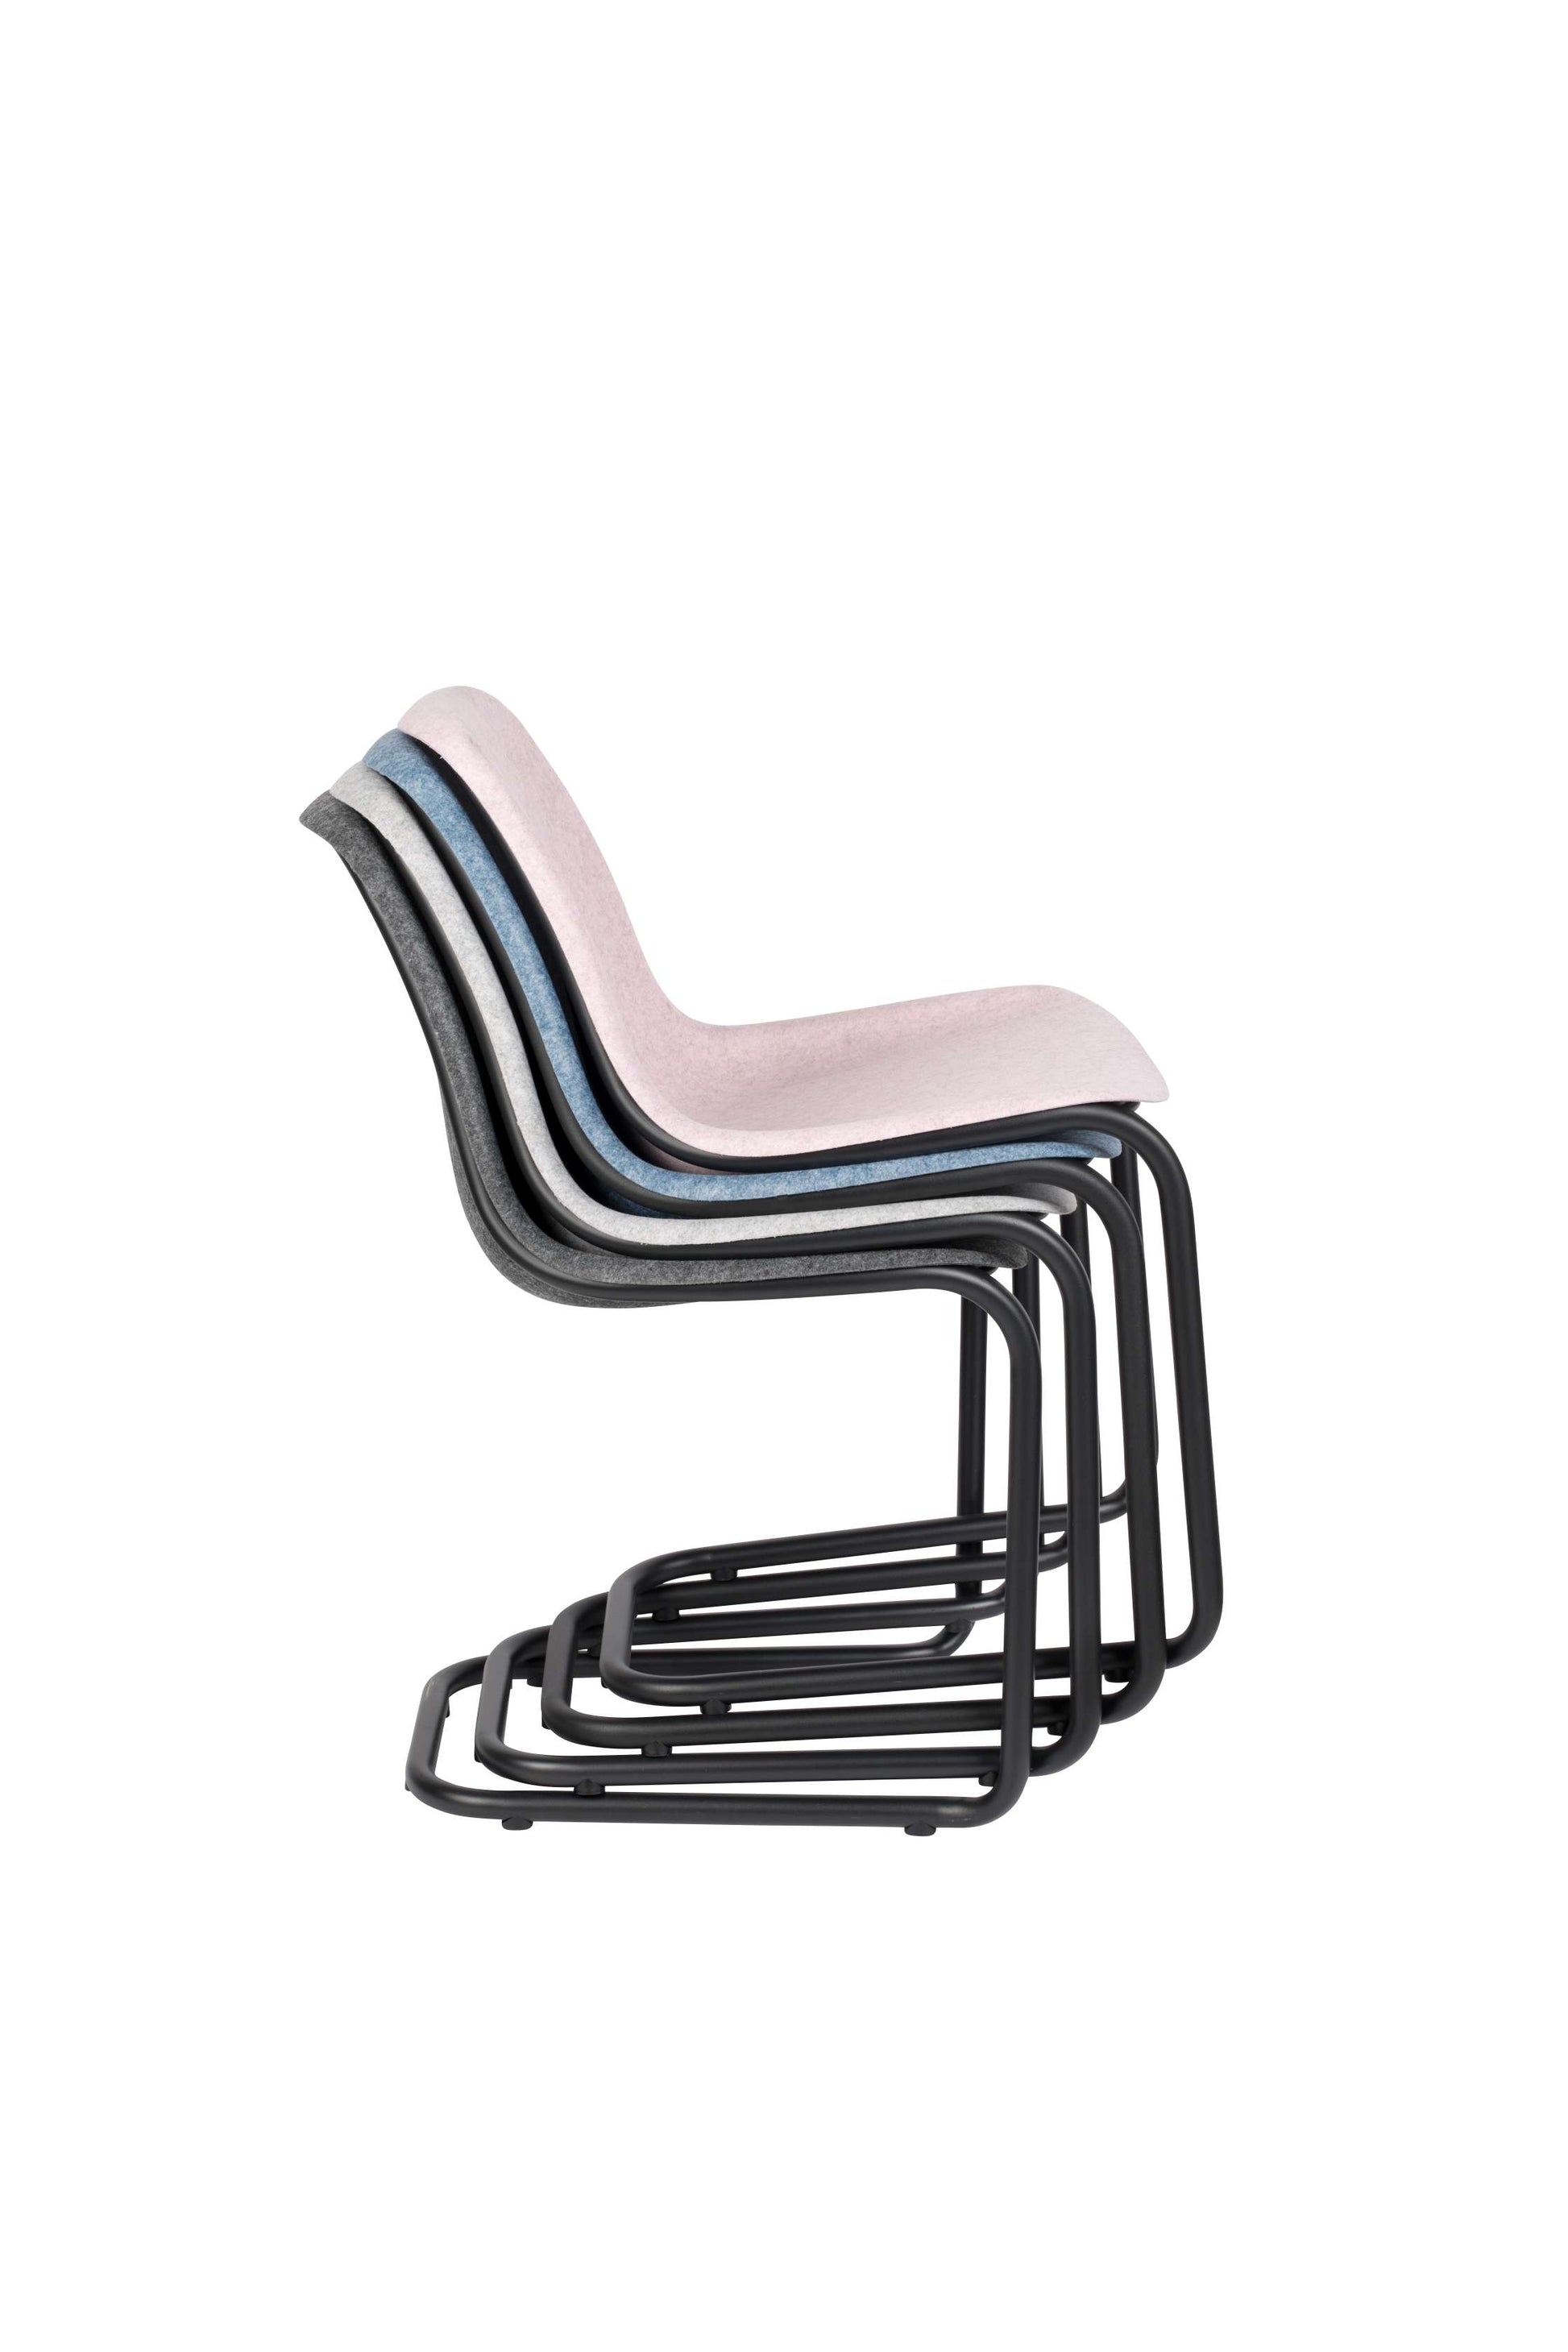 Zuiver | CHAIR THIRSTY SOFT PINK Default Title